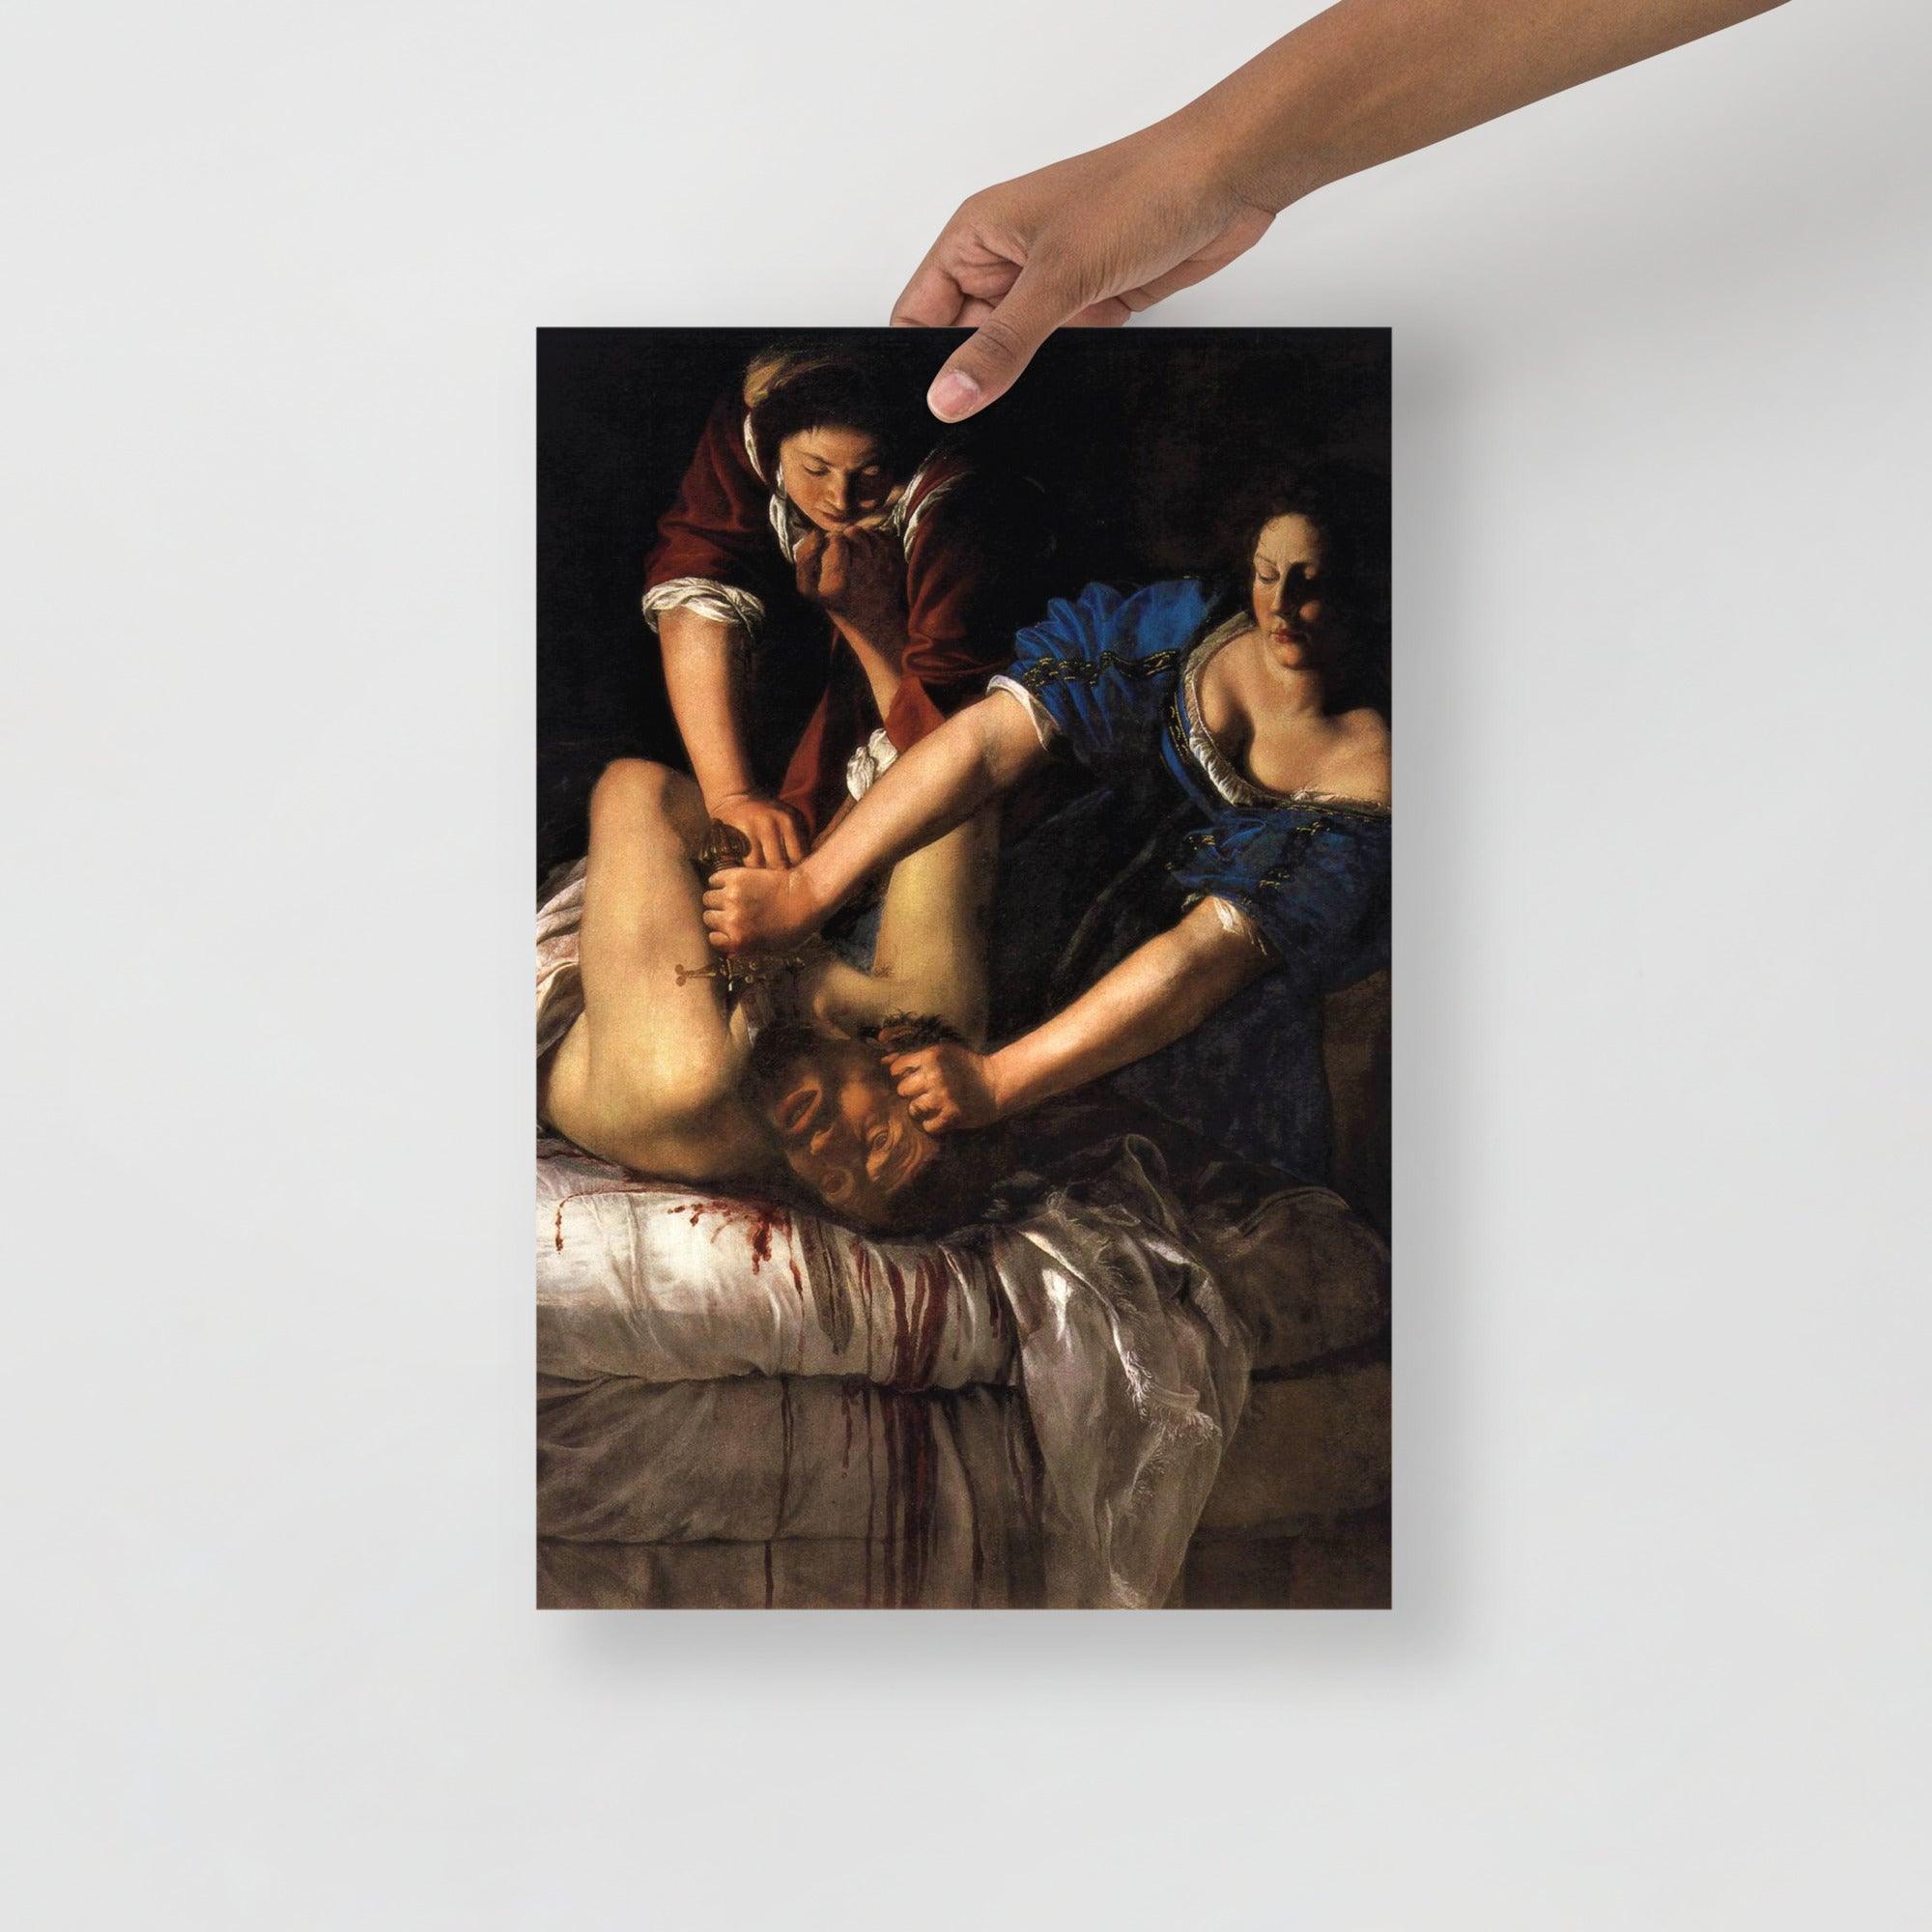 A Judith beheading Holofernes by Artemisia Gentileschi poster on a plain backdrop in size 12x18”.